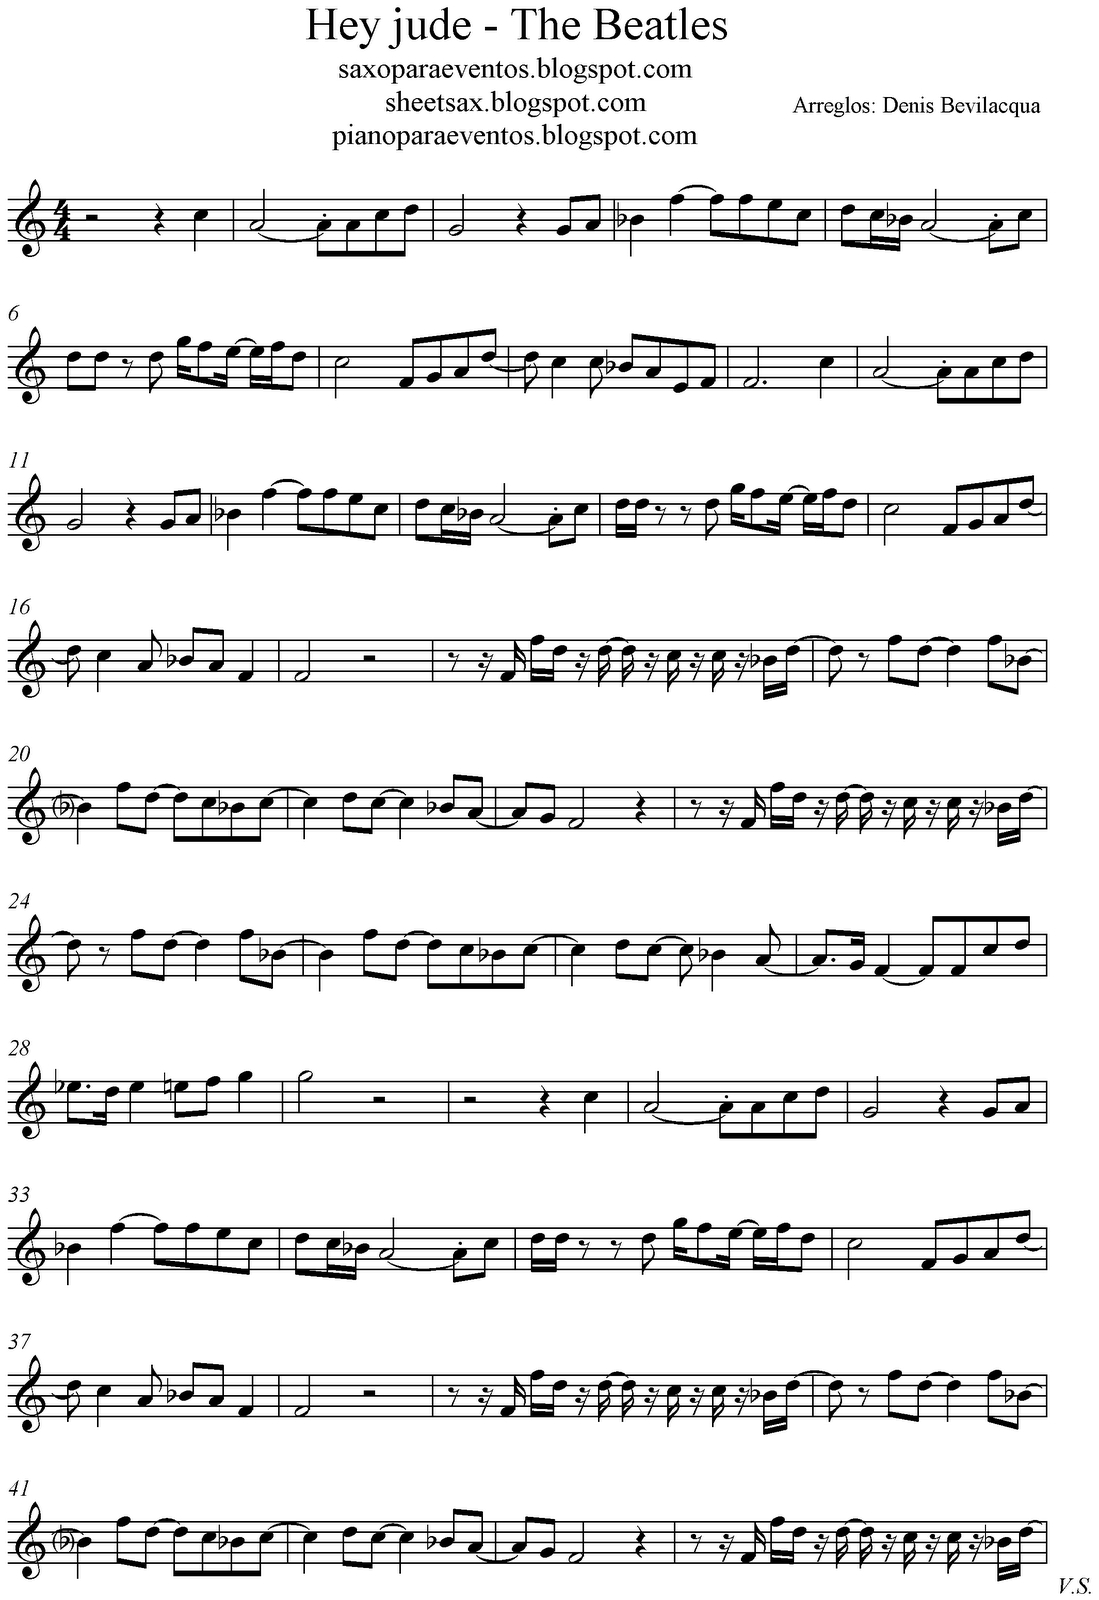 Hey Jude Sheet Music | Hey Jude - The Beatles Score And Track (Sheet - Free Printable Alto Saxophone Sheet Music Pink Panther